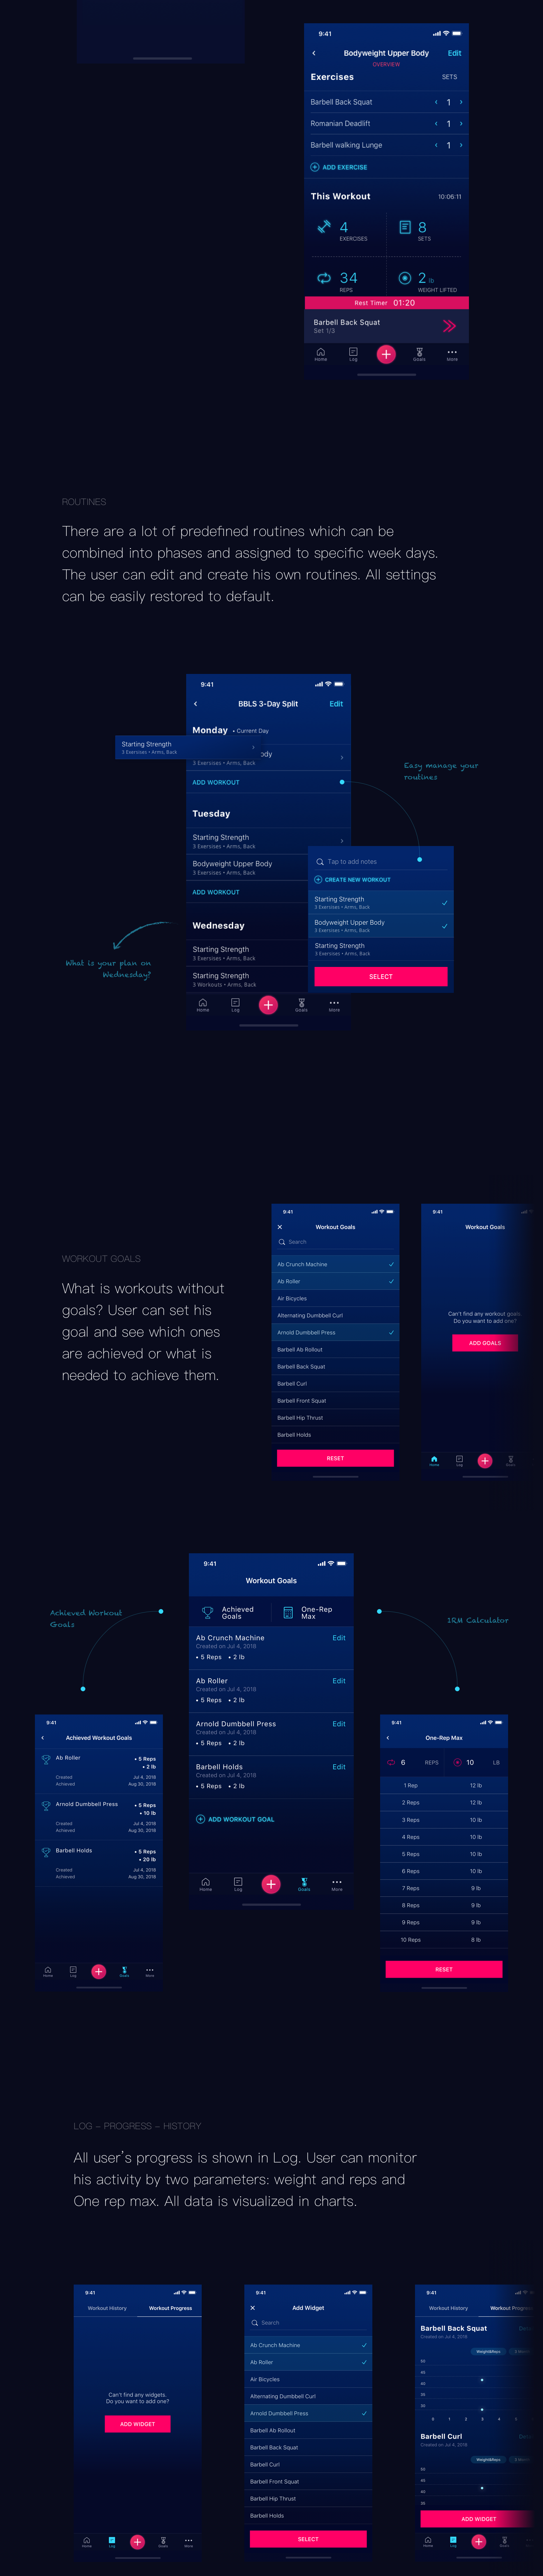 ios motion redesign Mobile app fitness routines workouts mobile timer UI/UX